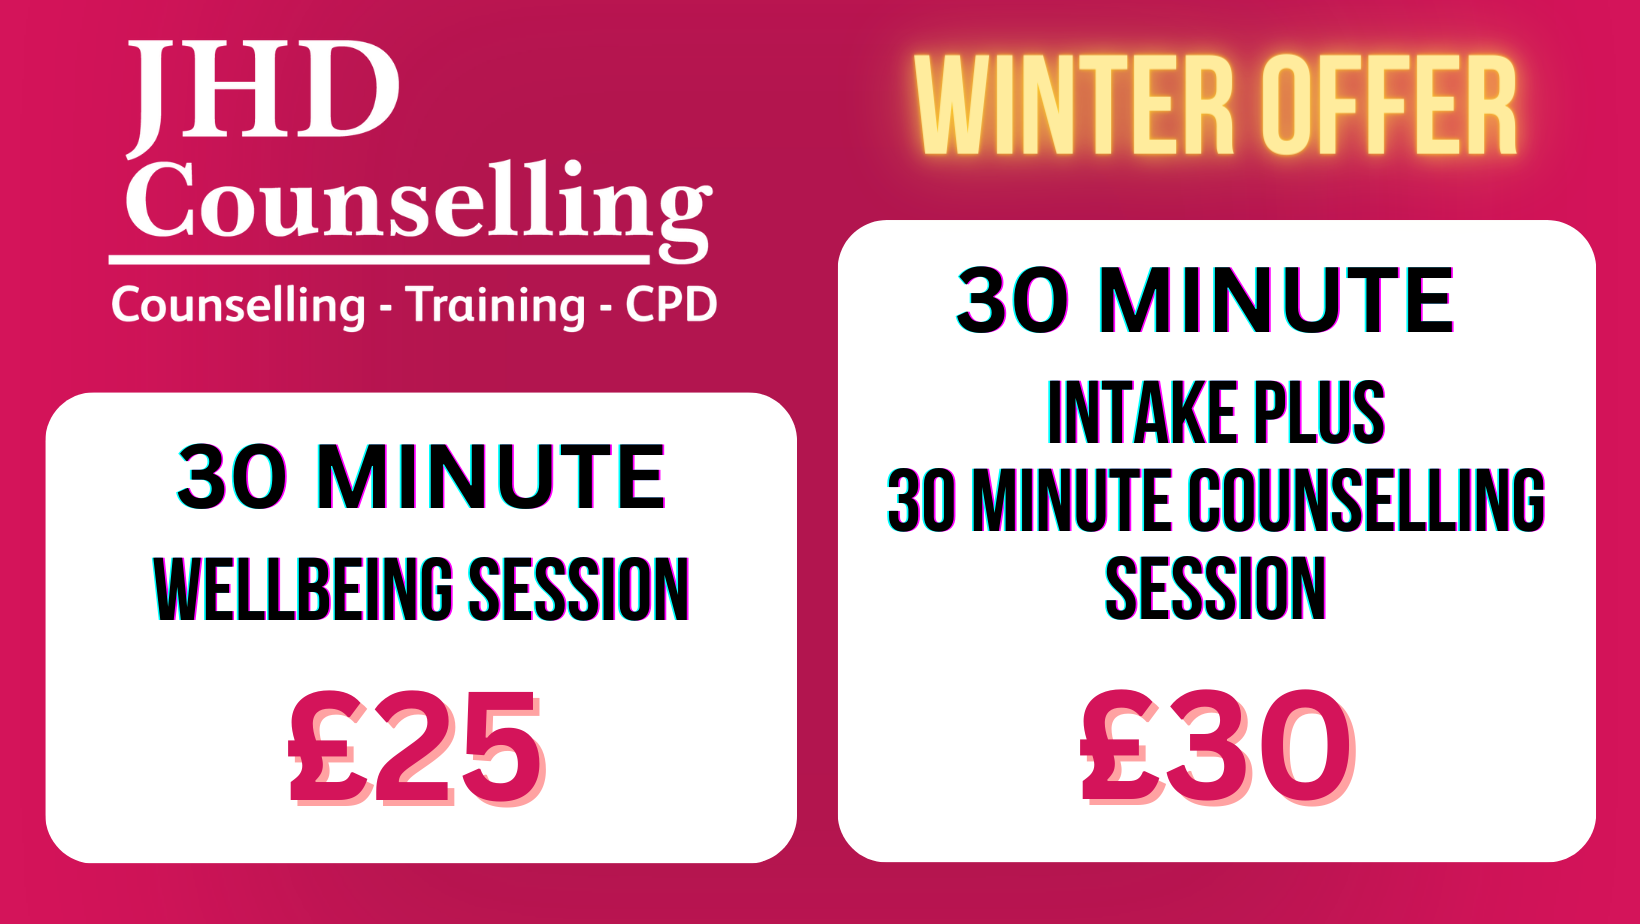 a winter offer for jhd counselling includes 30 minute intake plus 30 minute counselling session